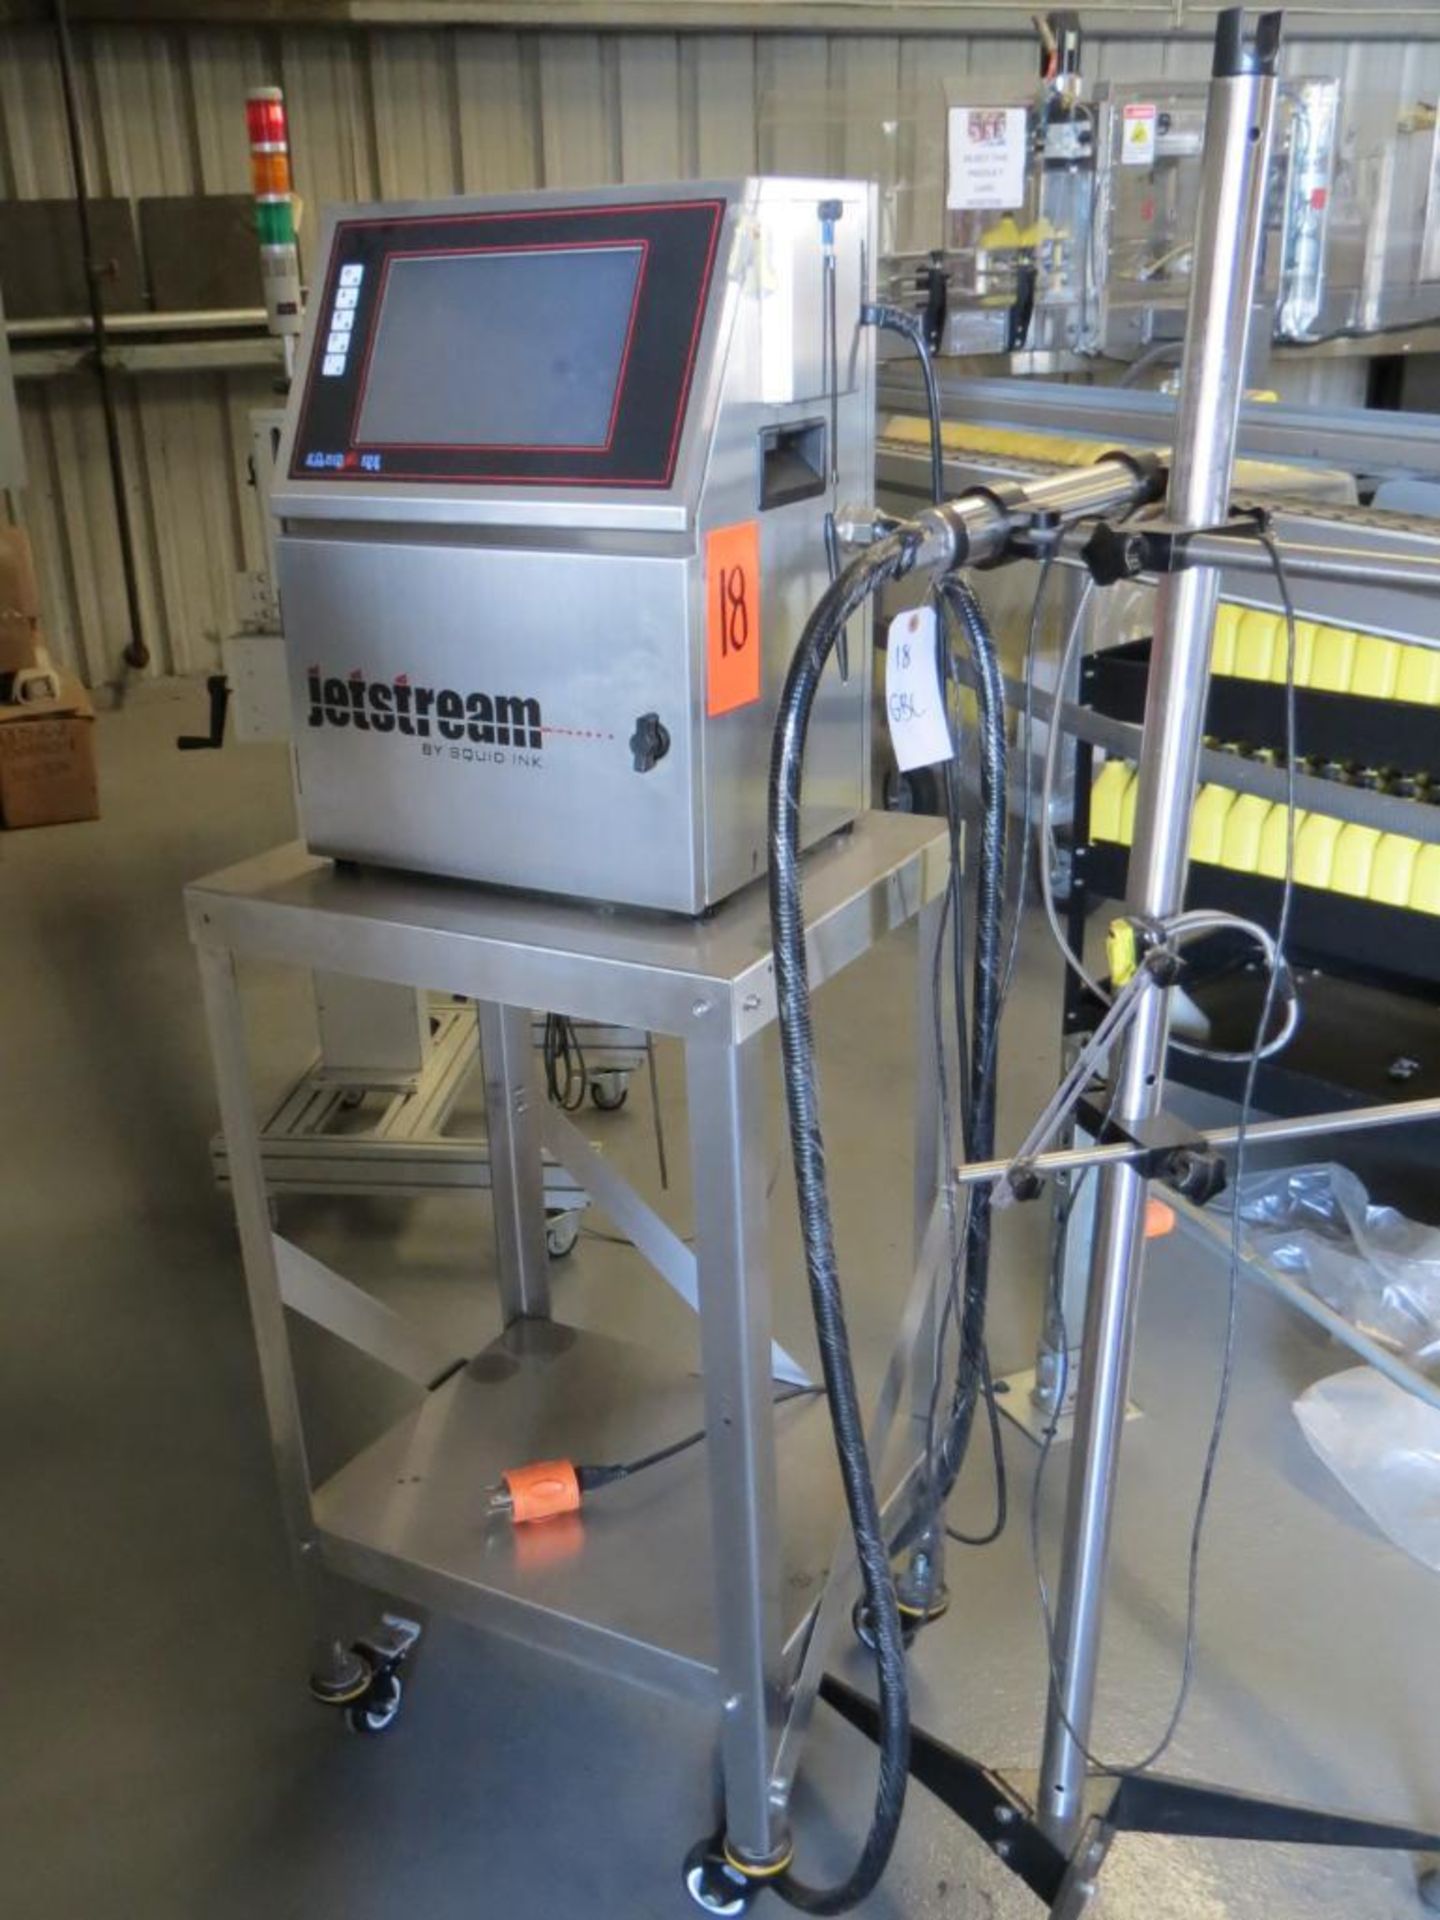 Jetstream Case Barcode Printer SN:2002067, M) Part of Complete Packaging Line - Image 2 of 2